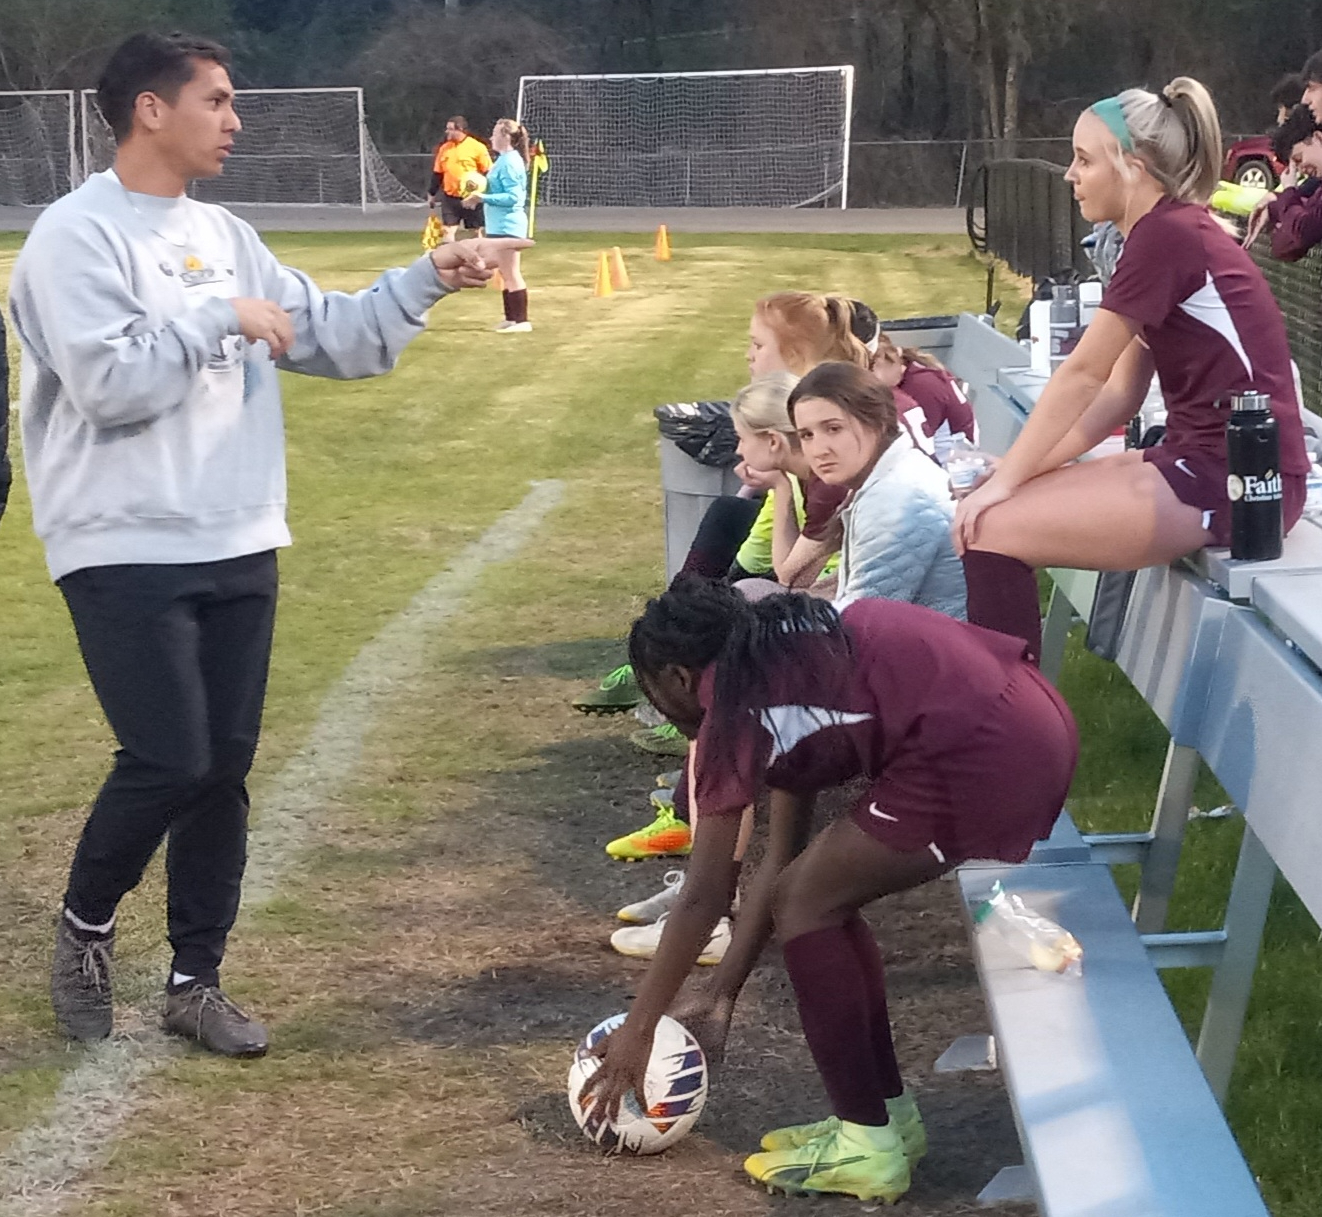 Donoho coach Vinny Yslava talks to Erin Turley in the second half of the Falcons’ victory over Weaver on Thursday. (Photo by Joe Medley)